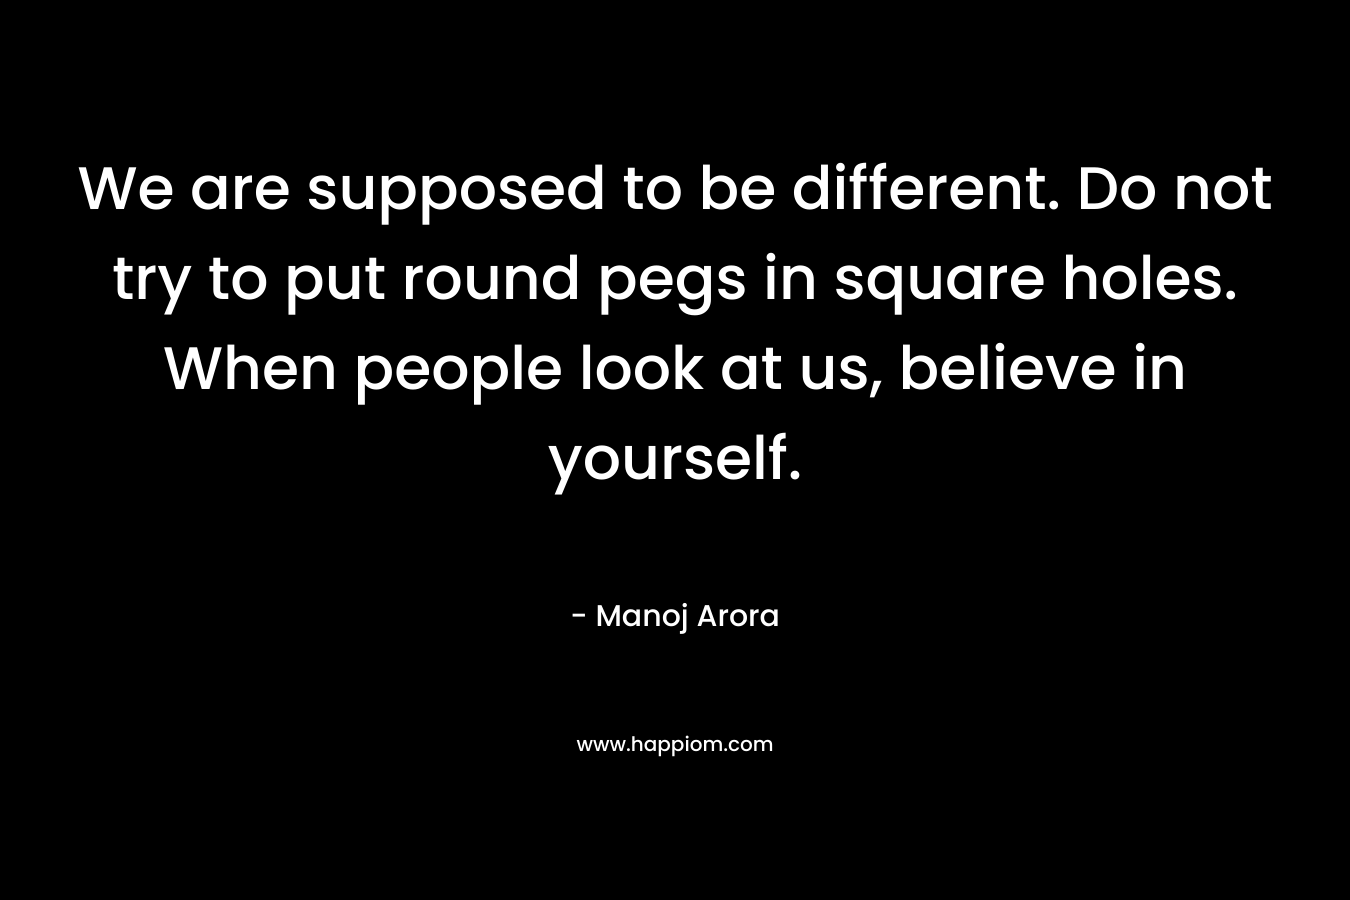 We are supposed to be different. Do not try to put round pegs in square holes. When people look at us, believe in yourself.